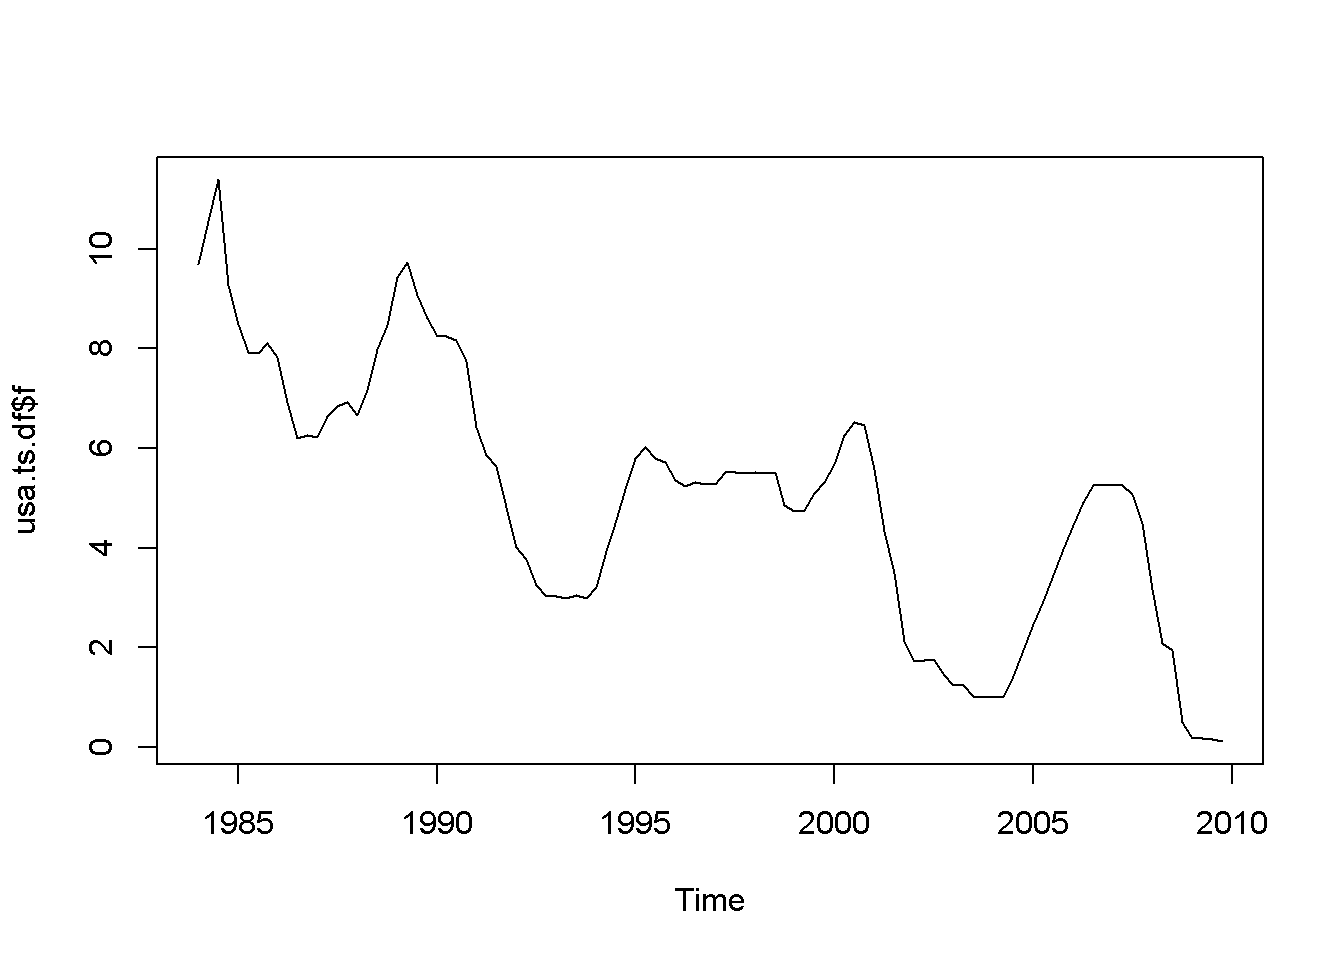 A plot and correlogram for series f in dataset usa